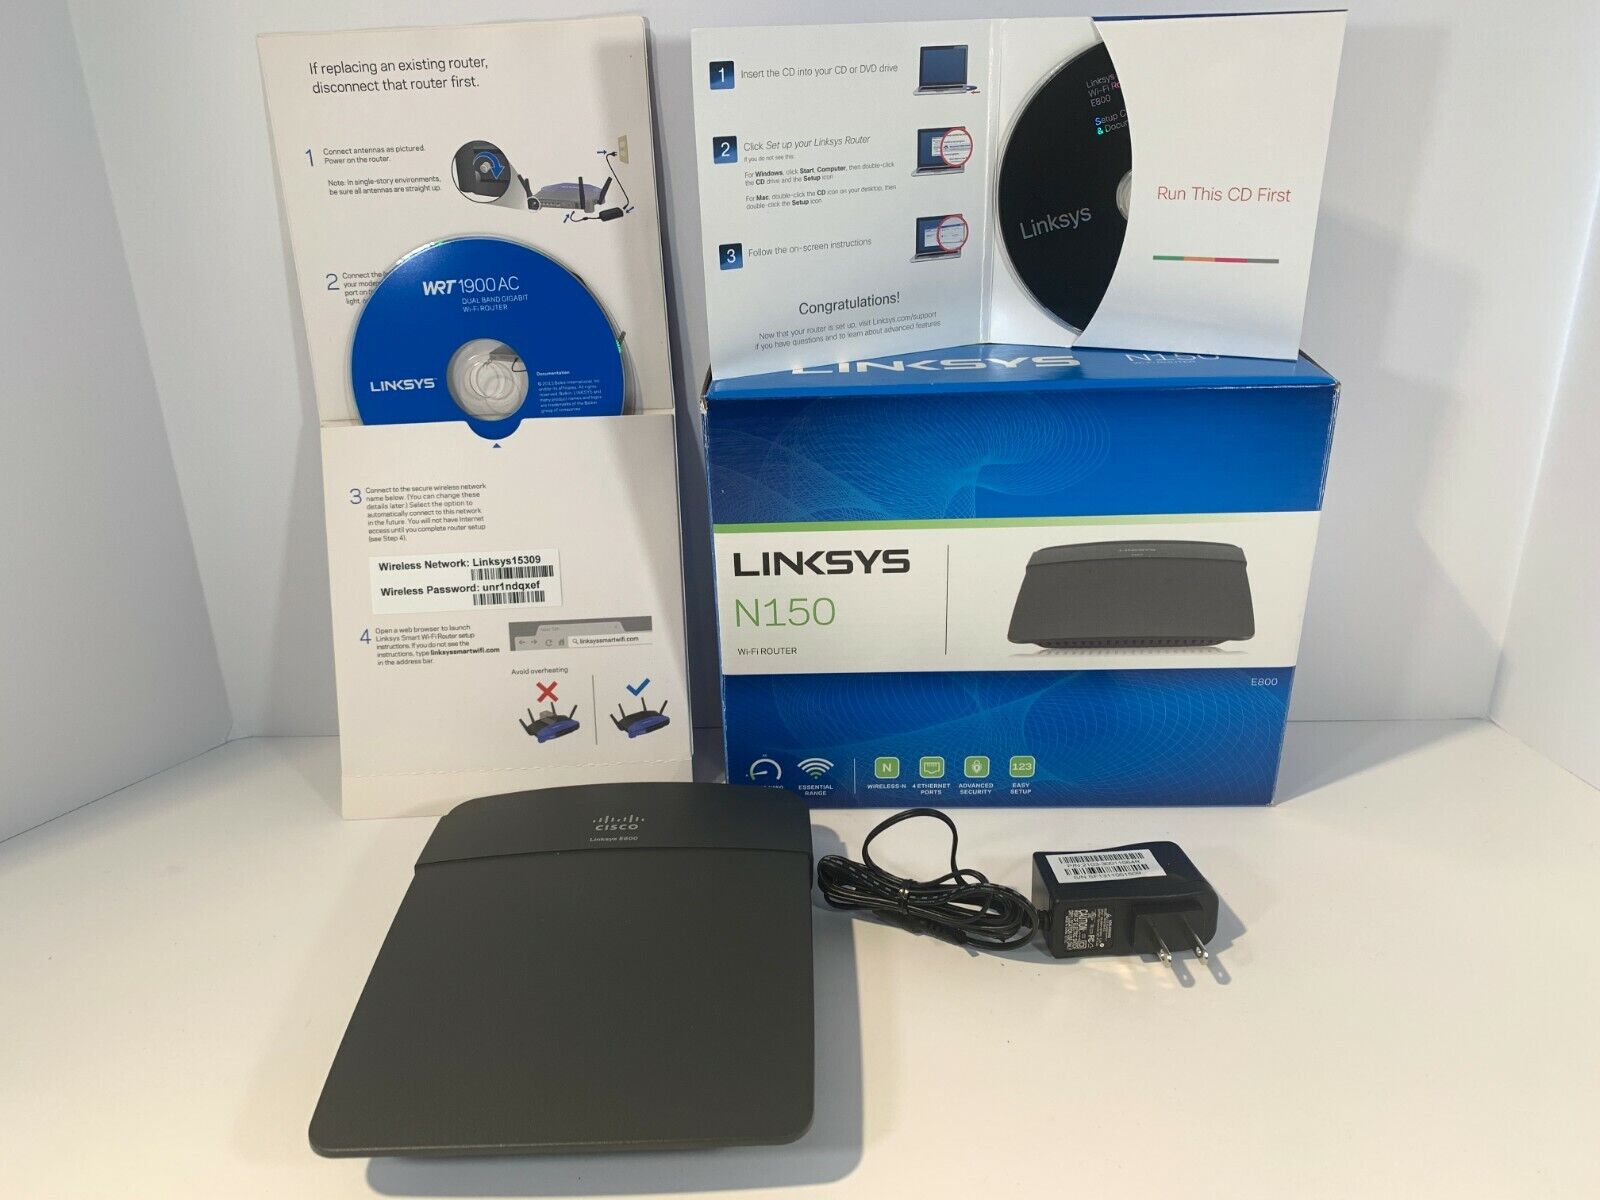 Linksys N150 E800 Wireless Router